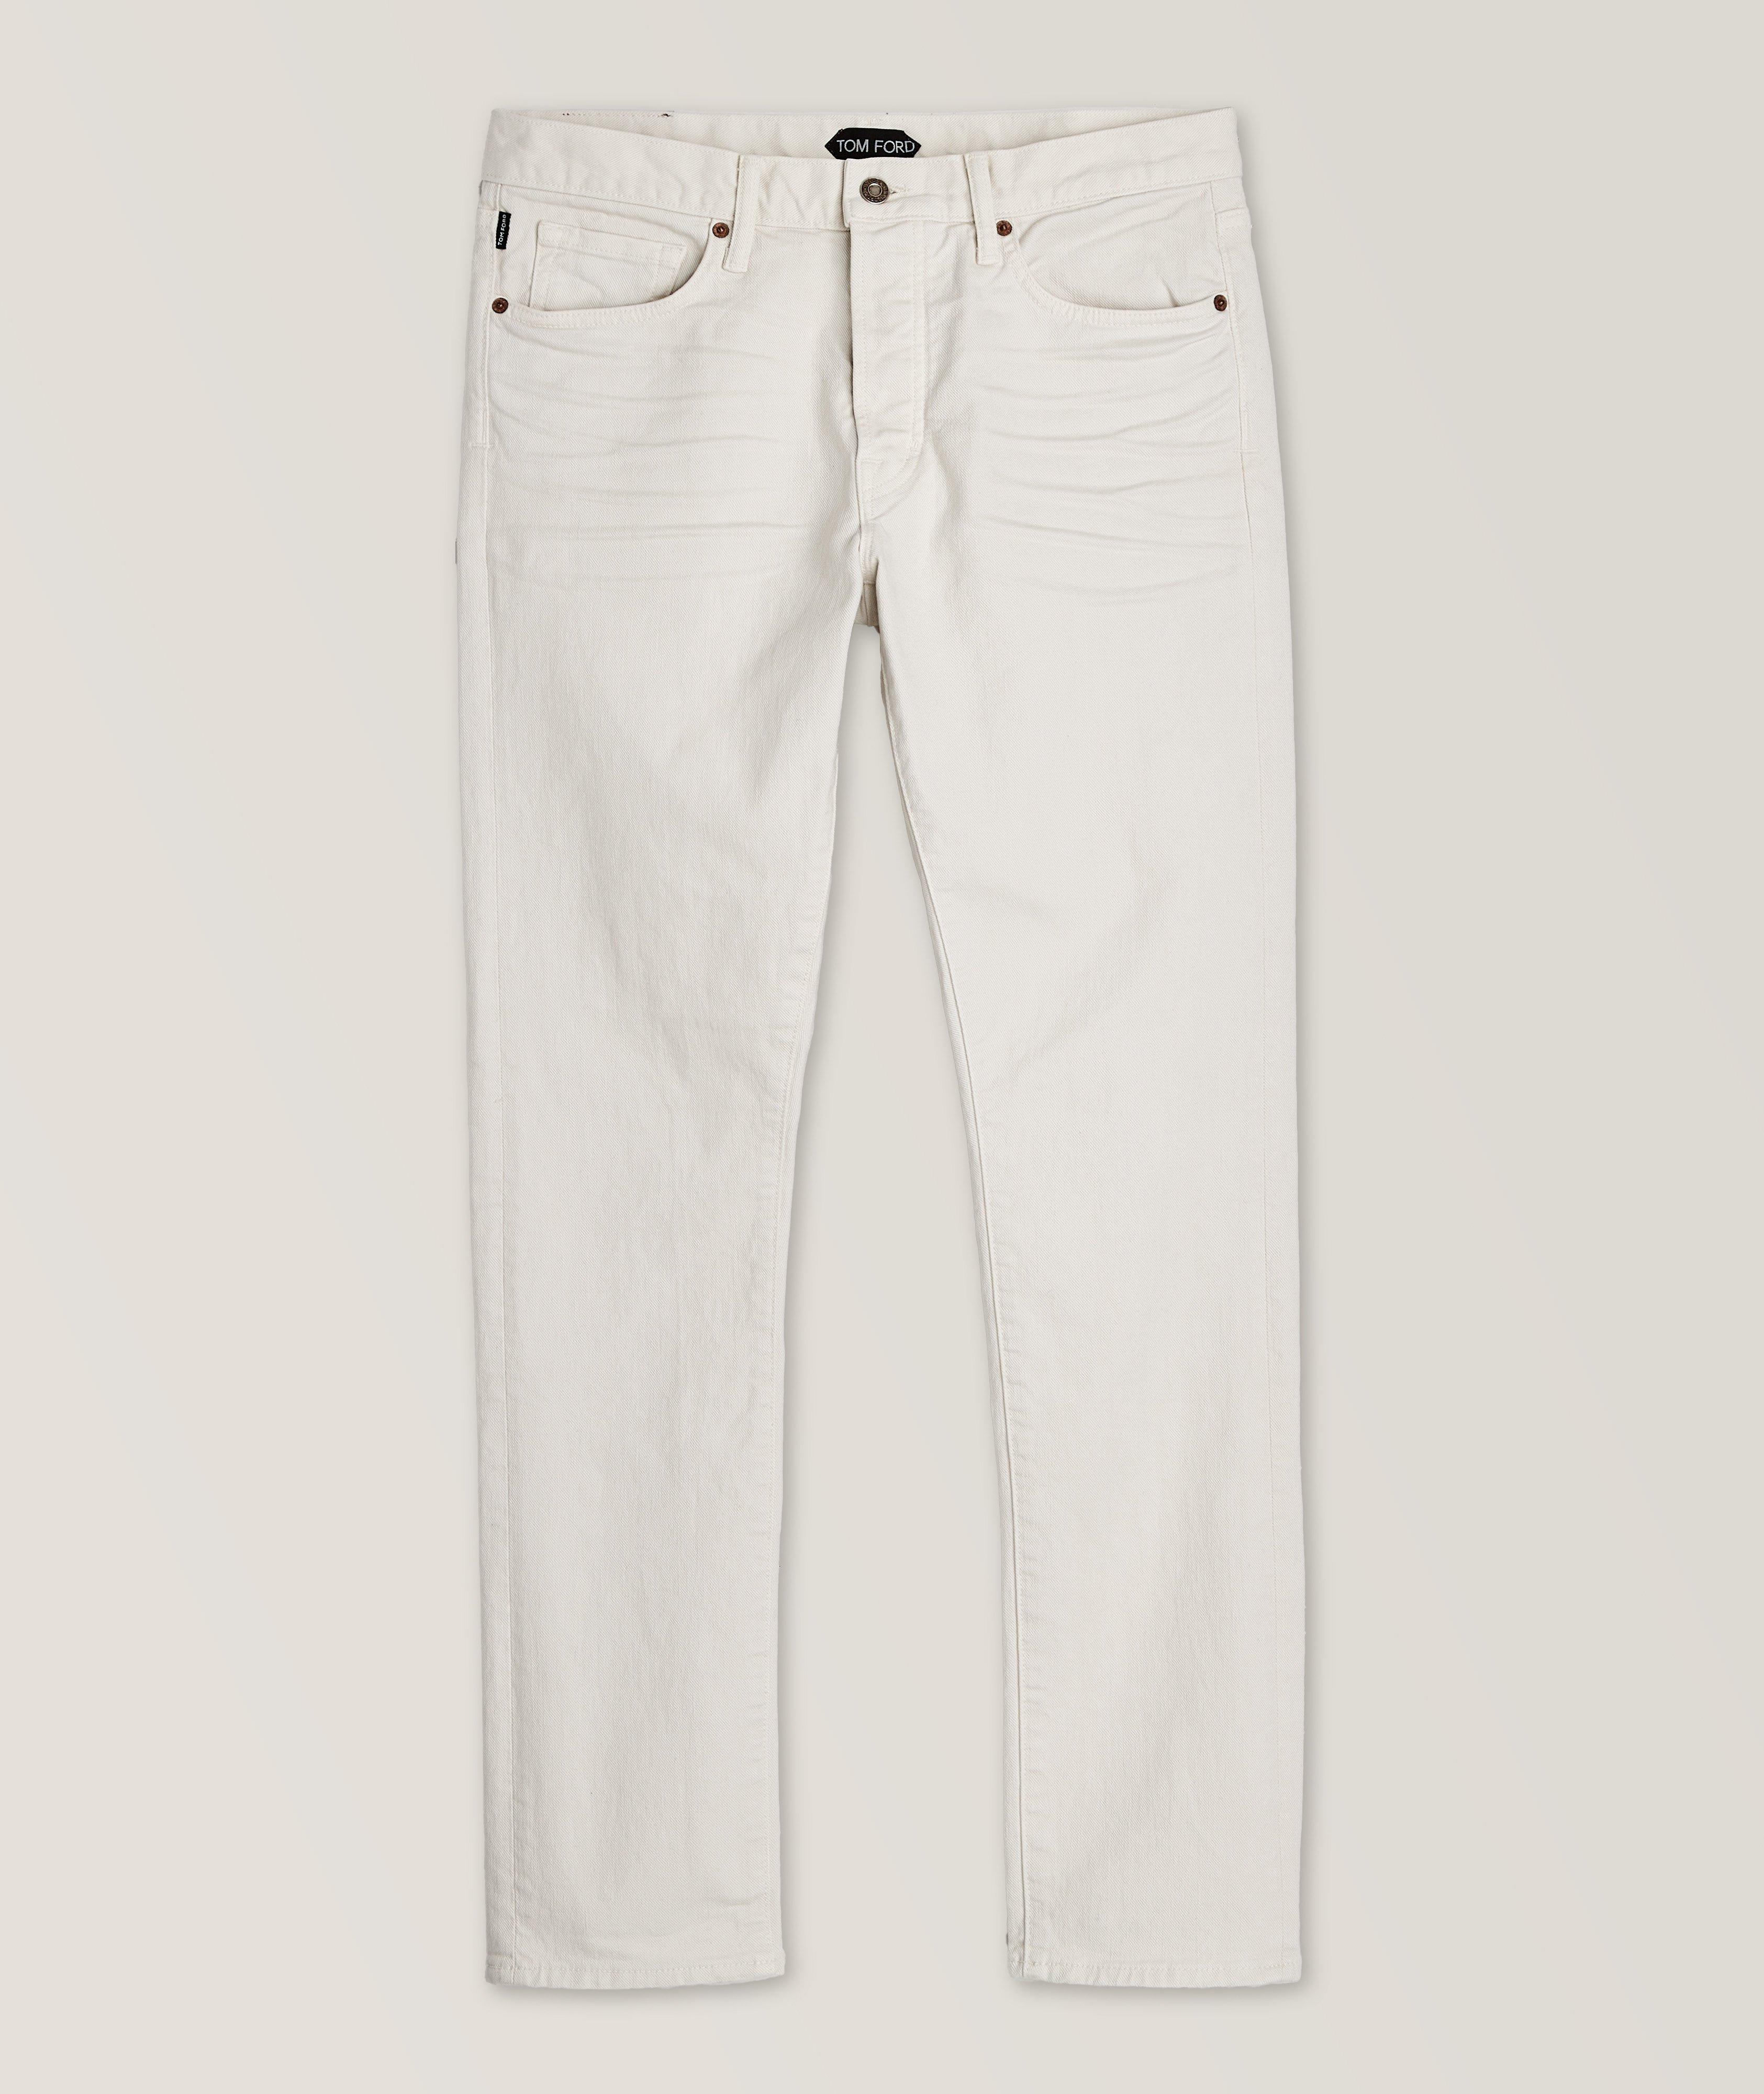 Slim Fit Twill Cotton Jeans image 0